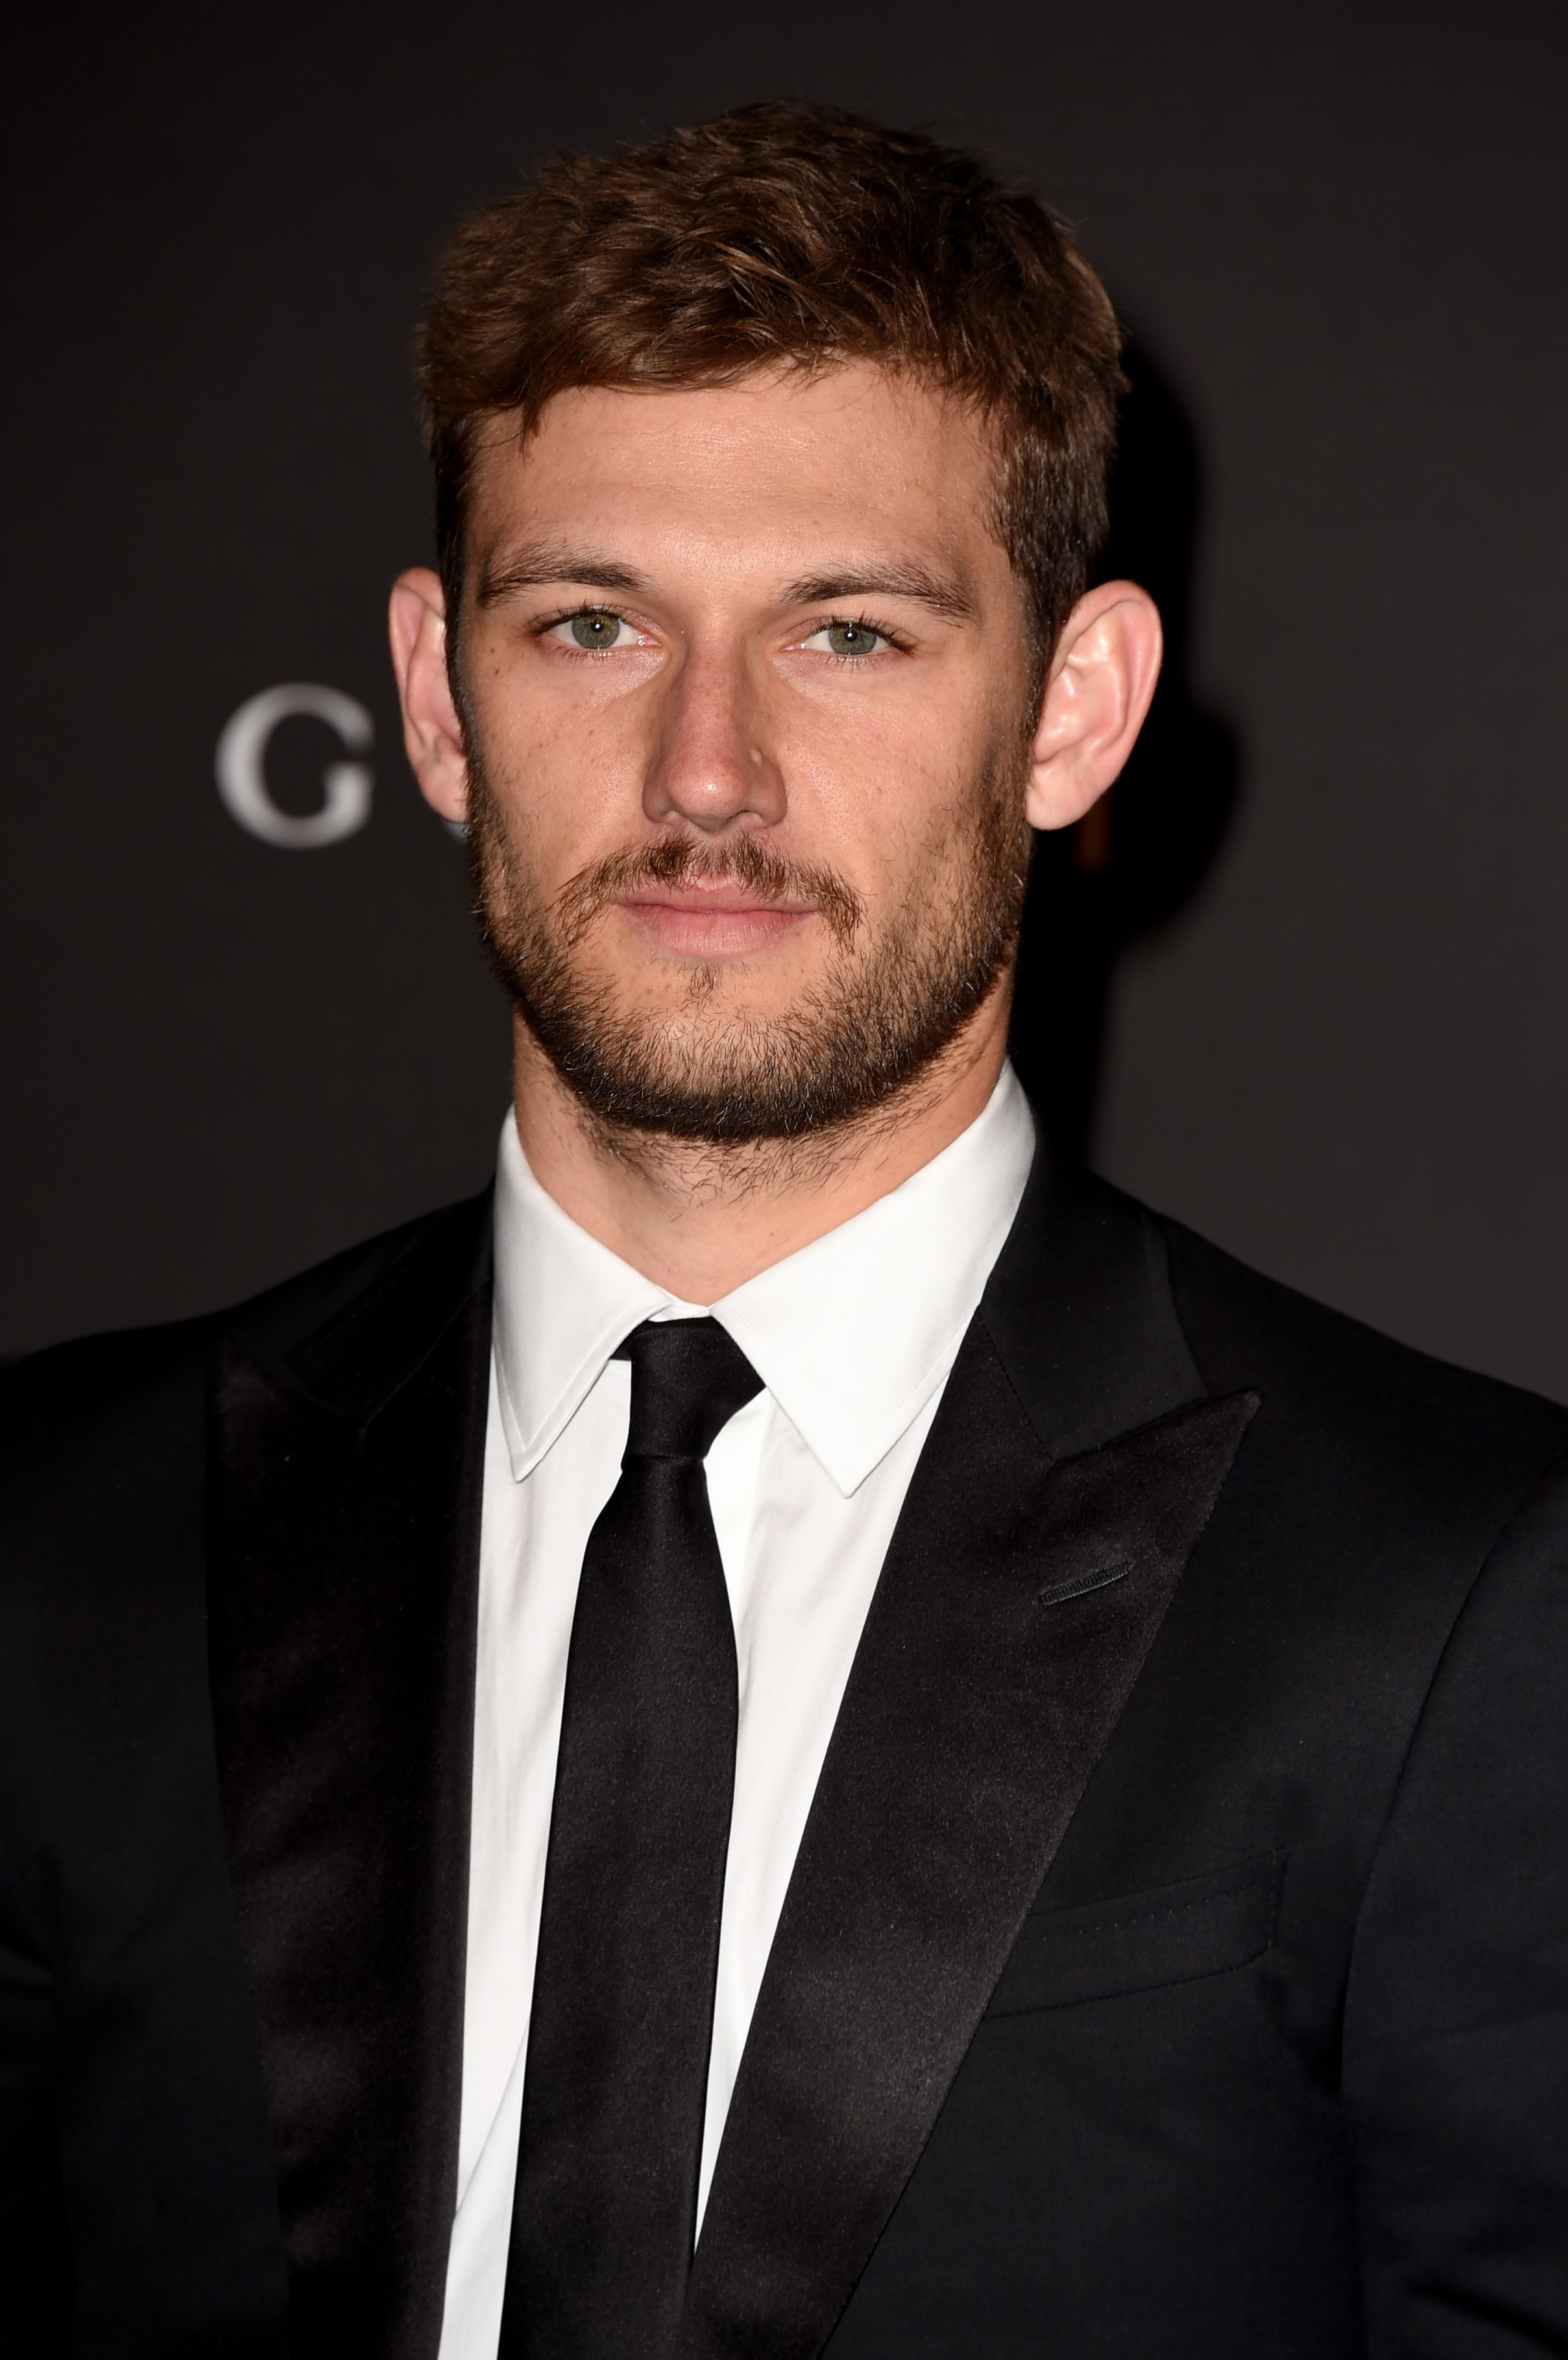 "Endless Love" star Alex Pettyfer at the 2014 LACMA Art + Film Gala honoring Barbara Kruger and Quentin Tarantino on November 1, 2014, in Los Angeles, California. | Source: Getty Images